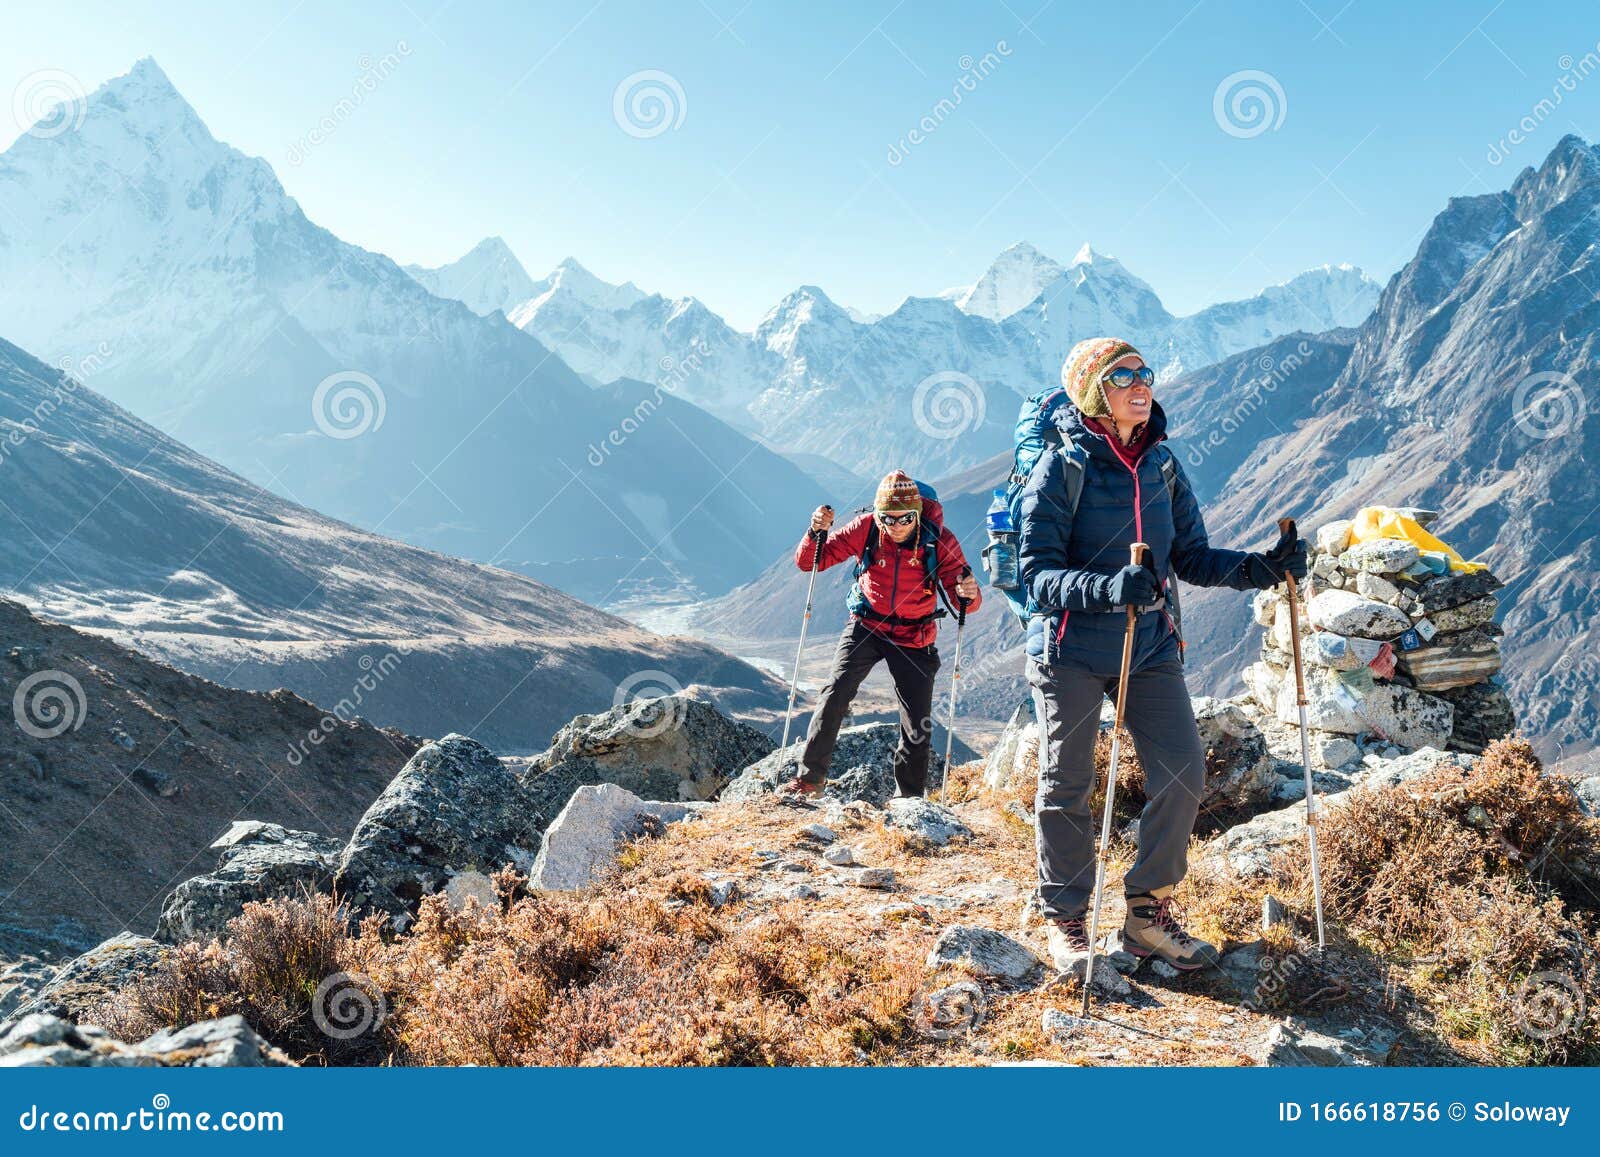 couple following everest base camp trekking route near dughla 4620m. backpackers carrying backpacks and using trekking poles and